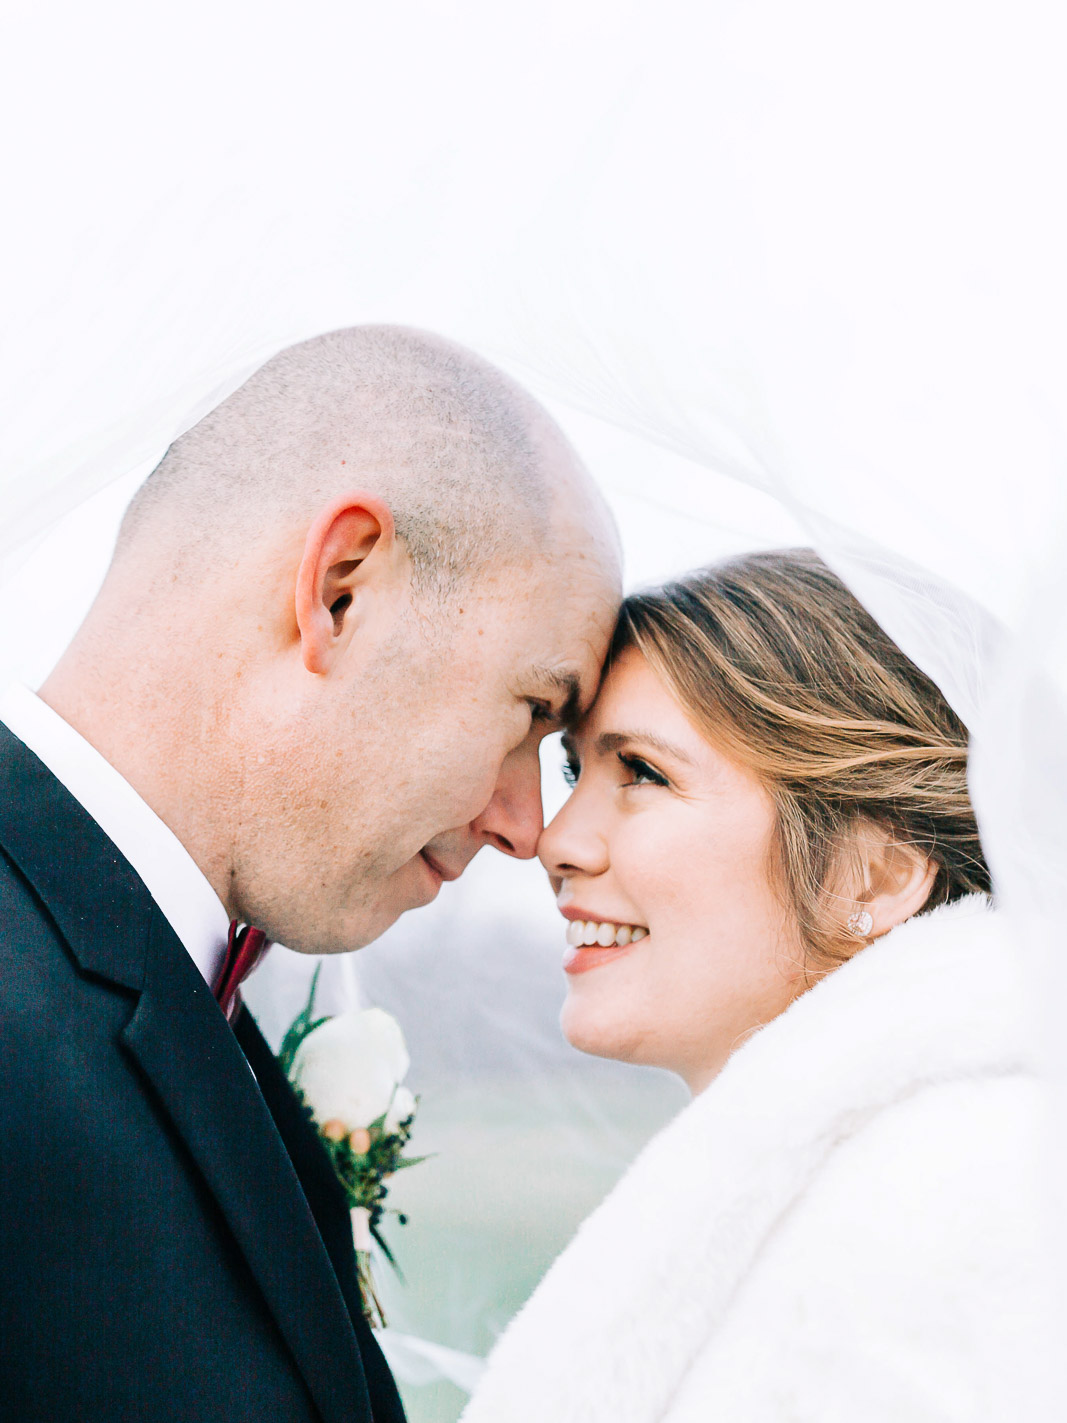 Bride and Groom Portrait forehead to forehead winter wedding